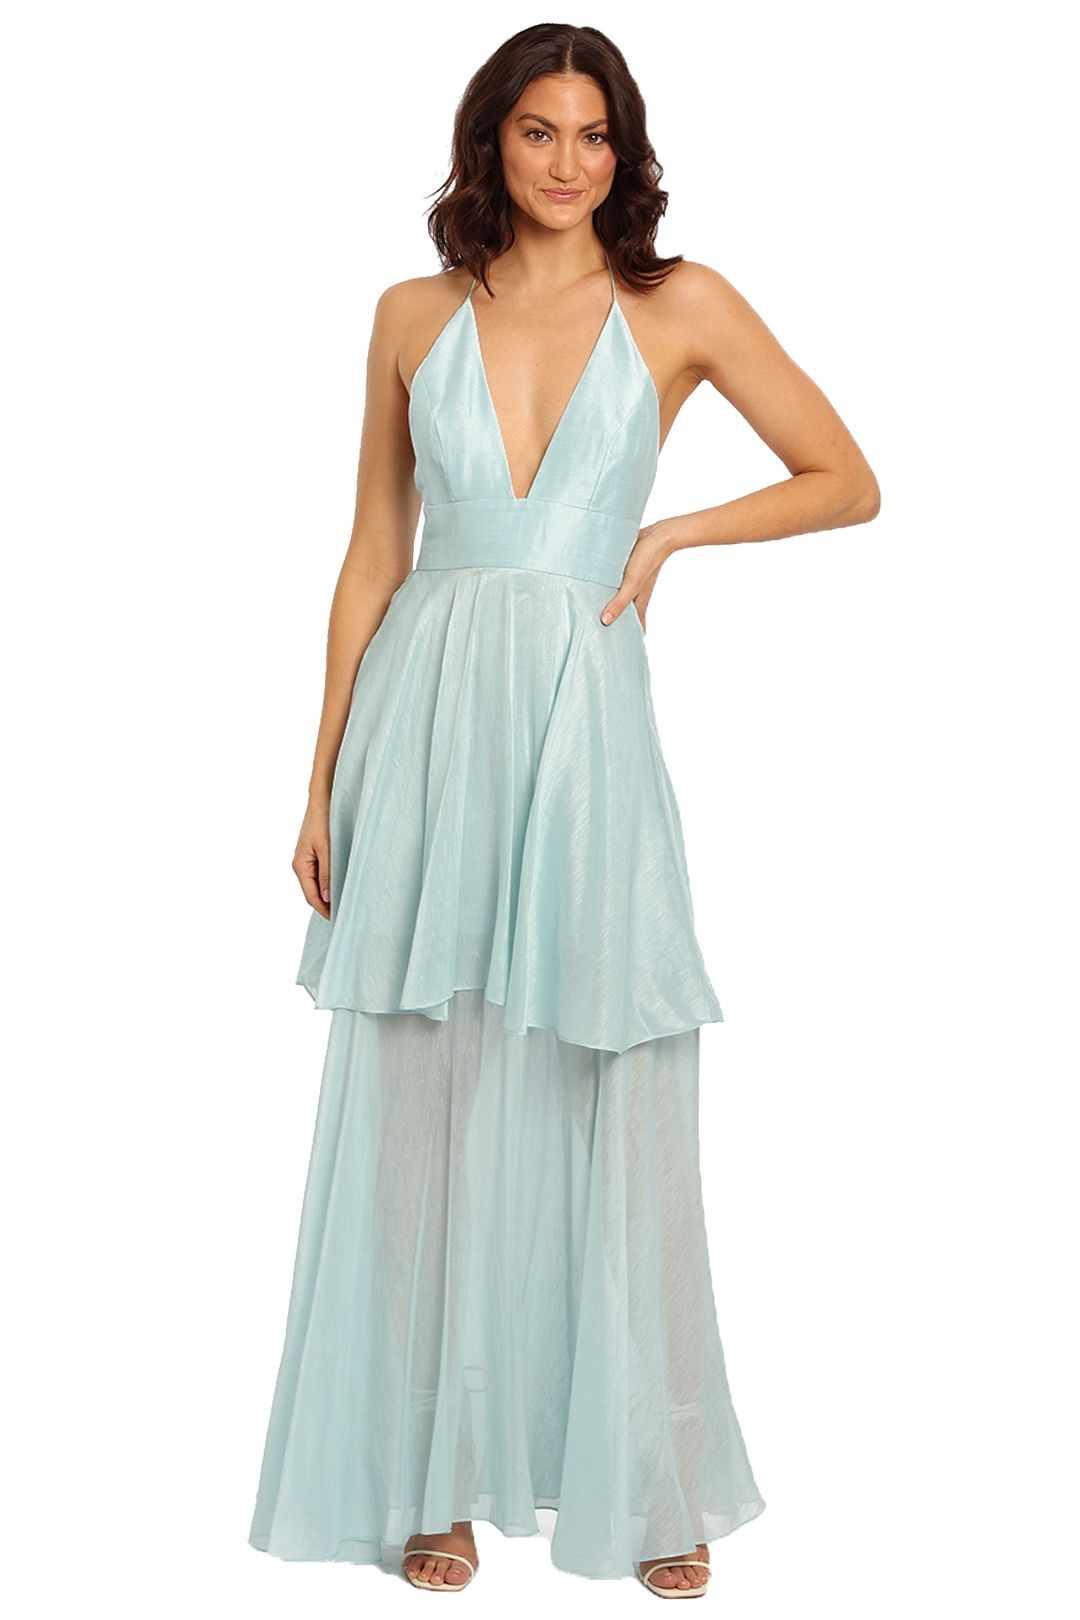 Ginger and Smart Eminence Gown Aloe Blue tiered